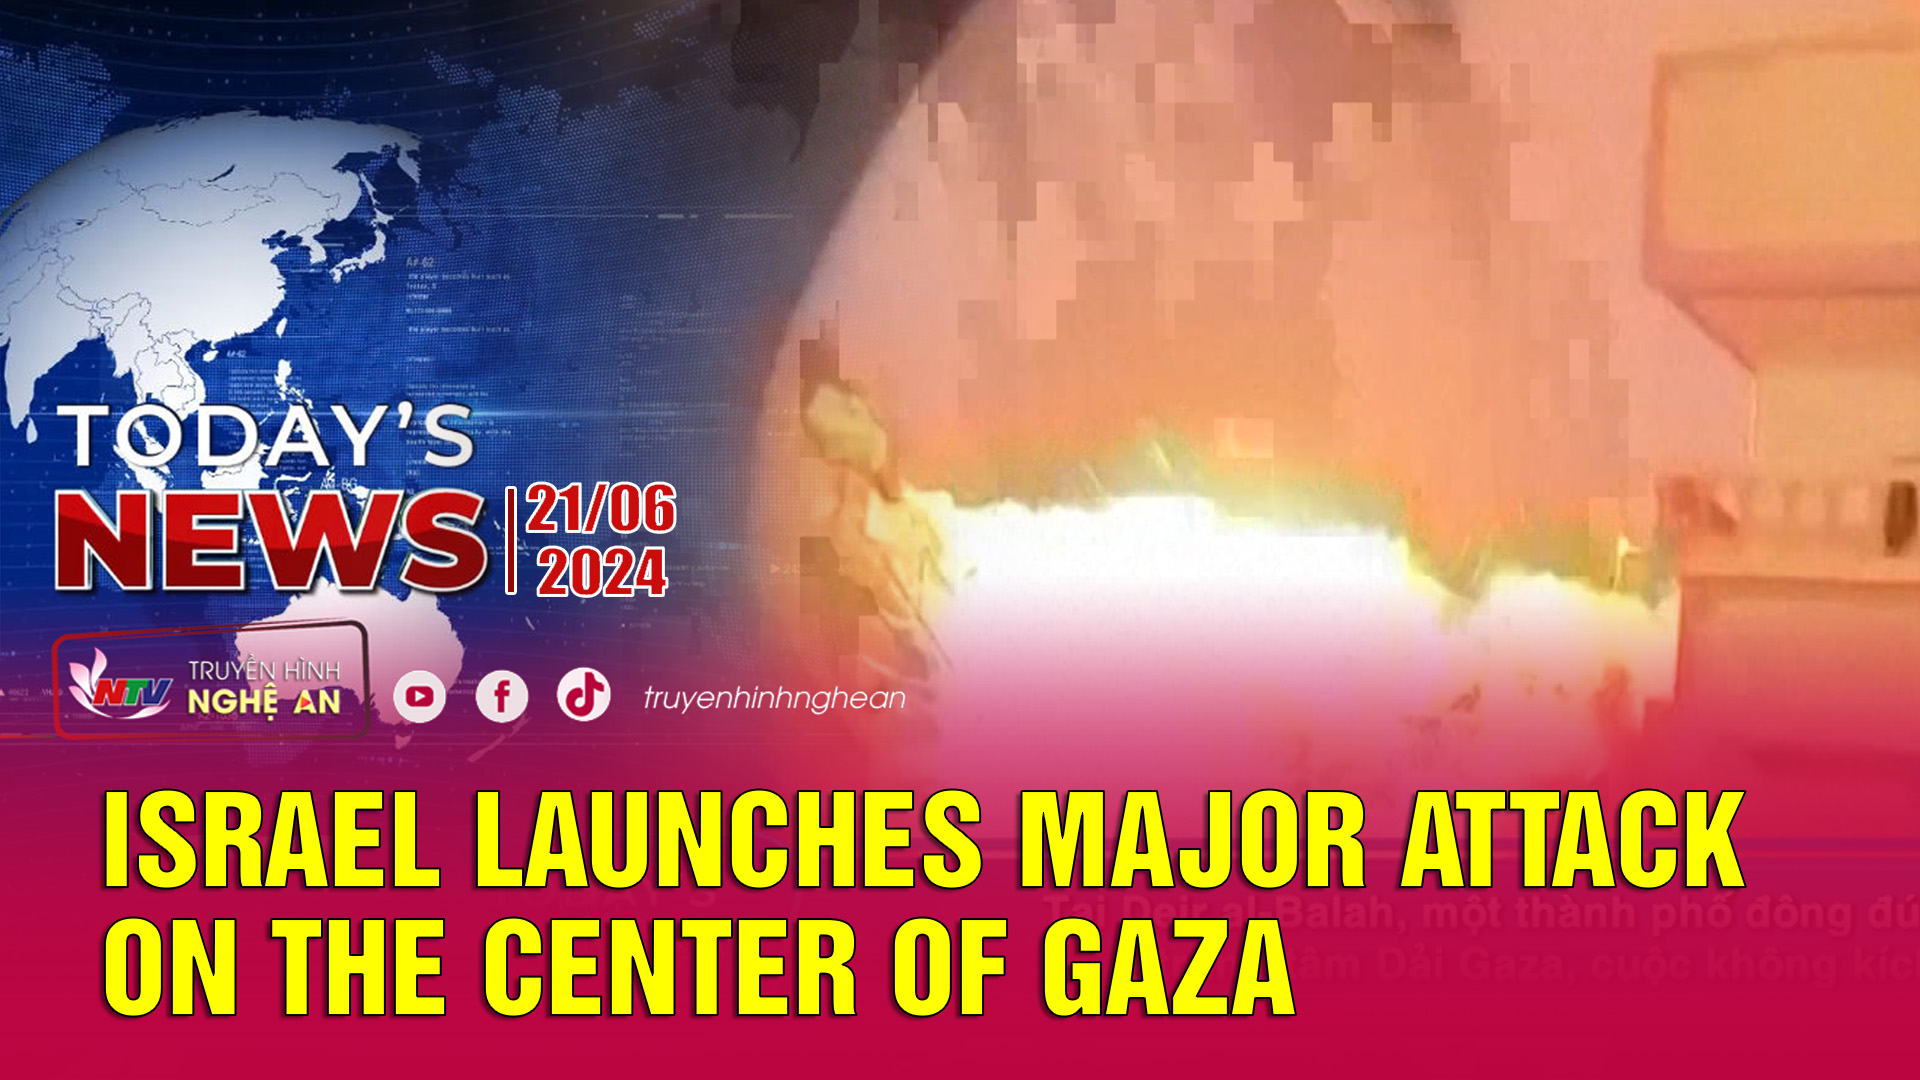 Today's News - 21/06/2024:  Israel launches major attack on the center of Gaza